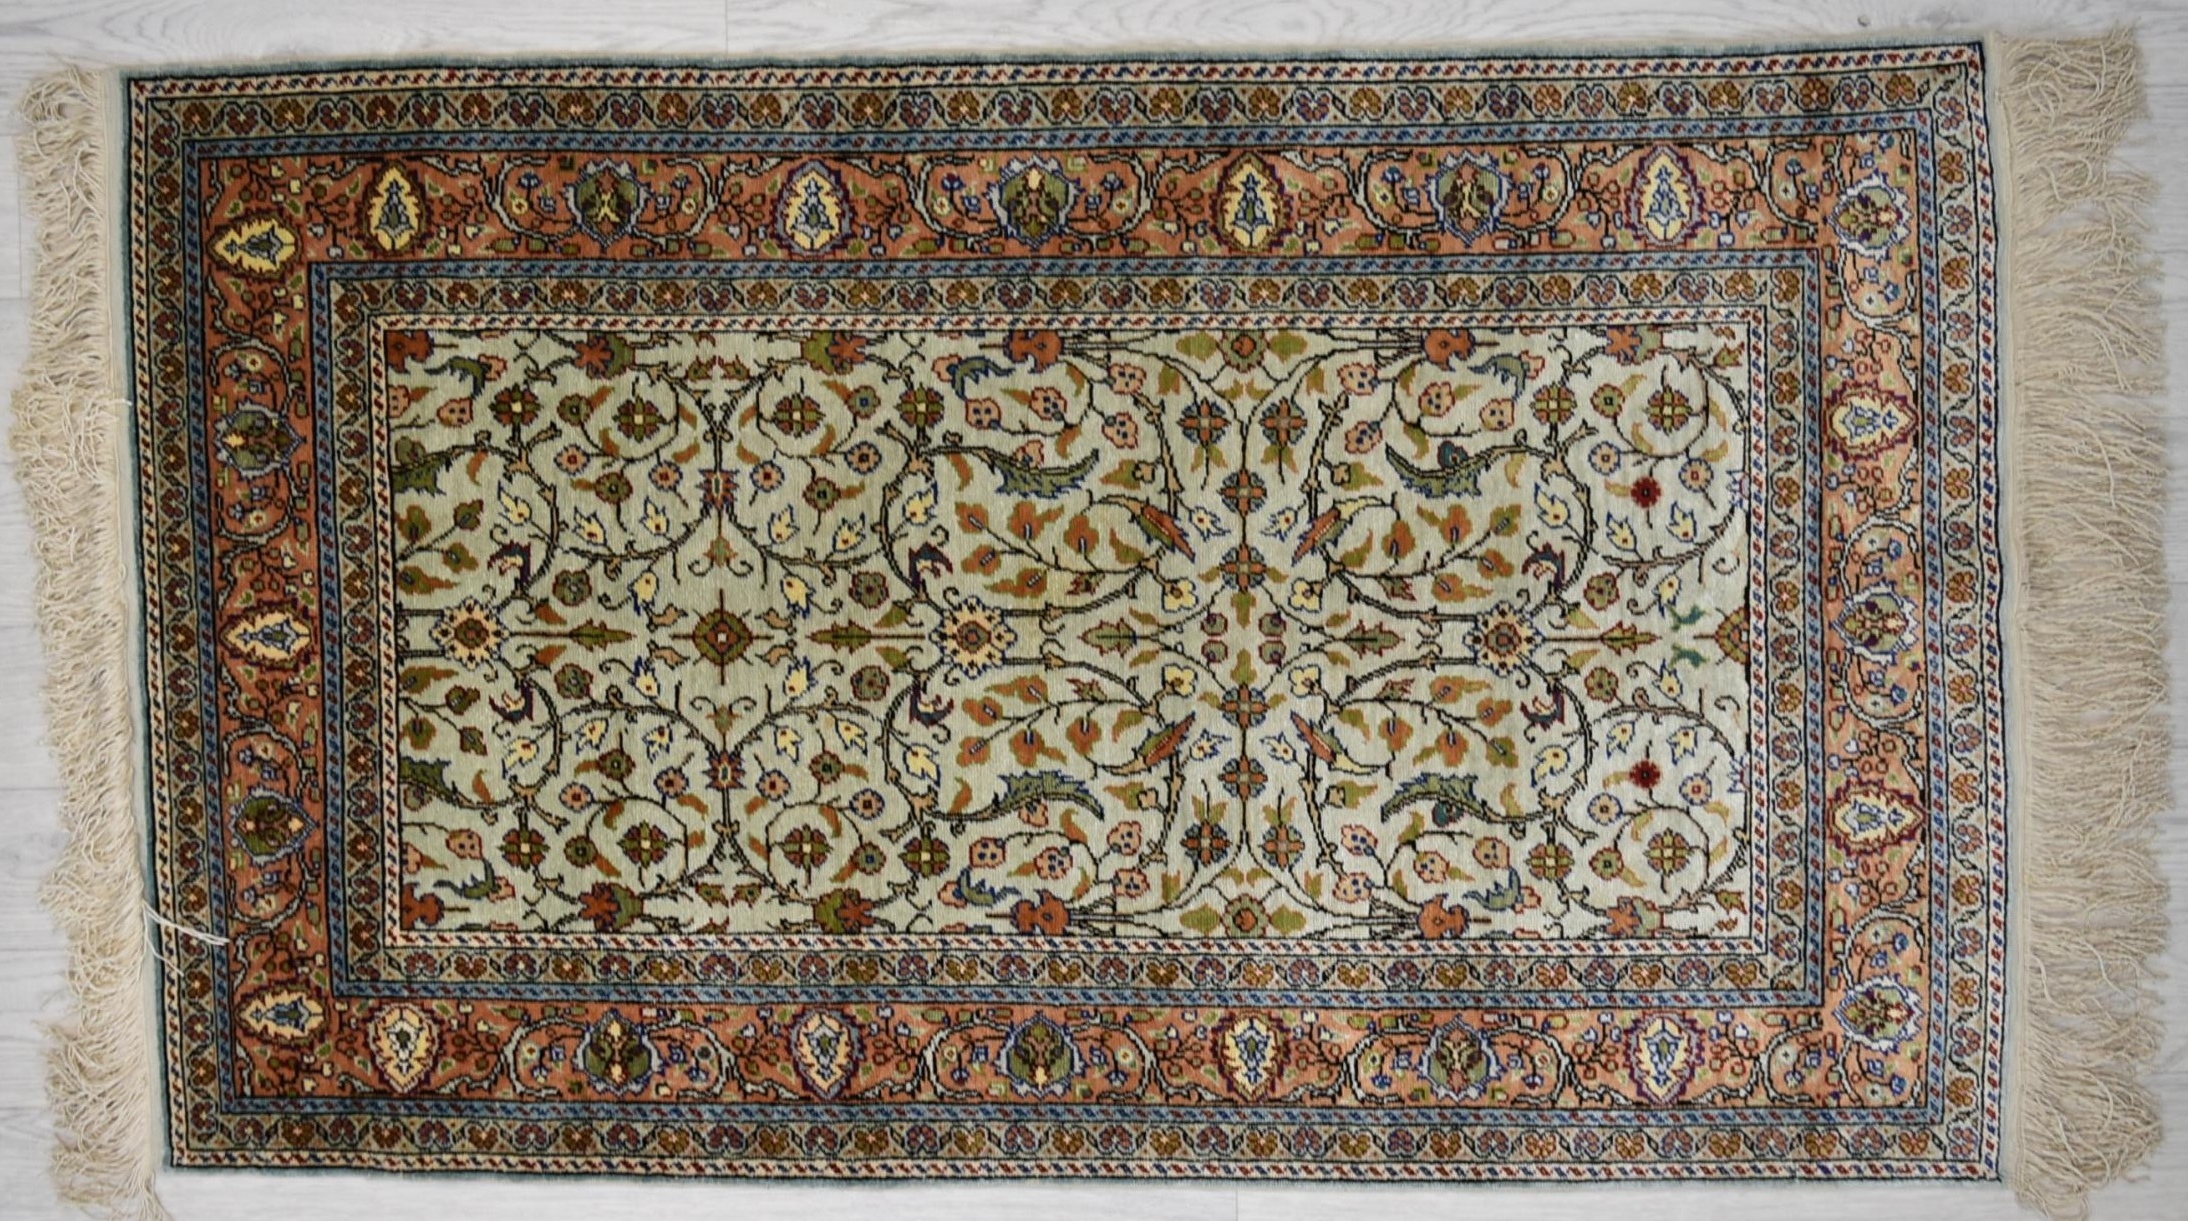 A 20th century Persian/Iranian silk Qom (Qum) rug, the ivory field with tree of life pattern